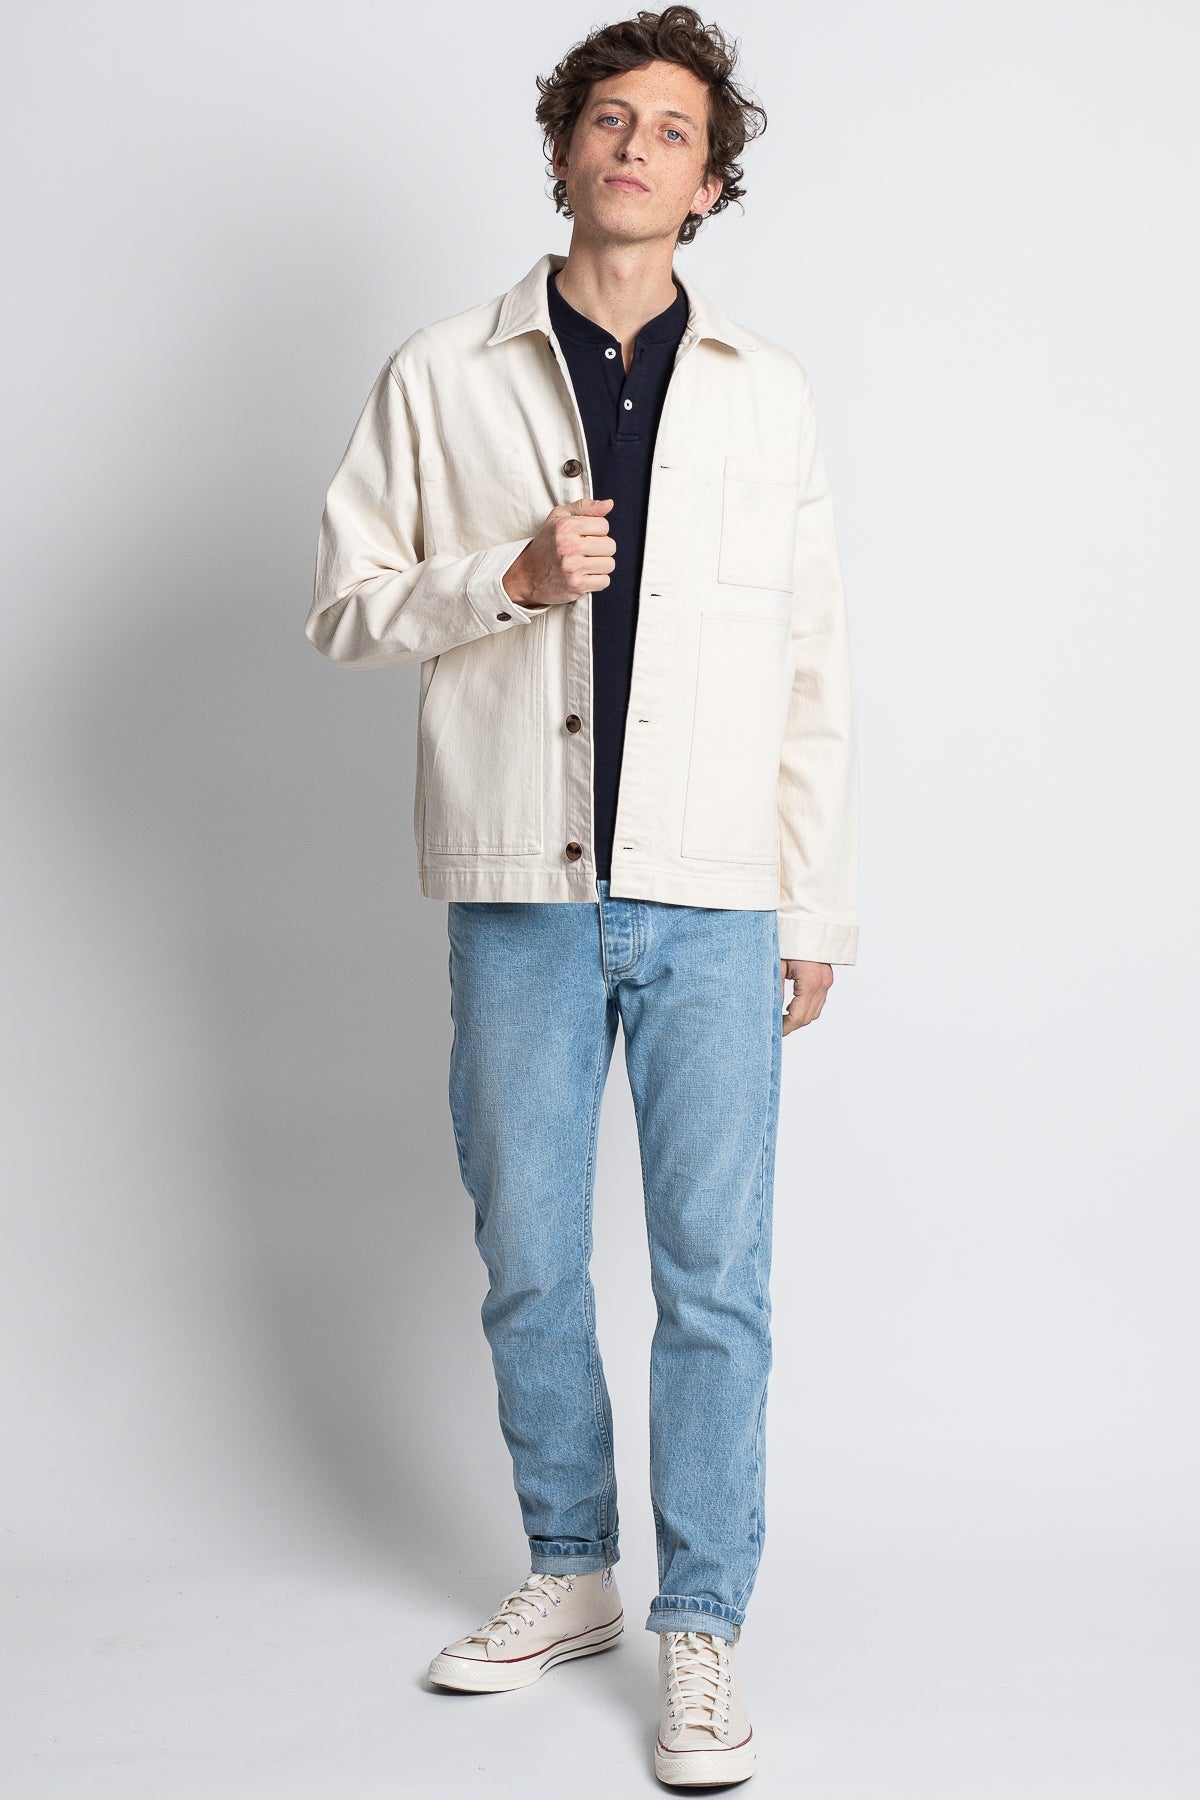 Jaqk - Off-White Jacket - Chill - The Good Chic